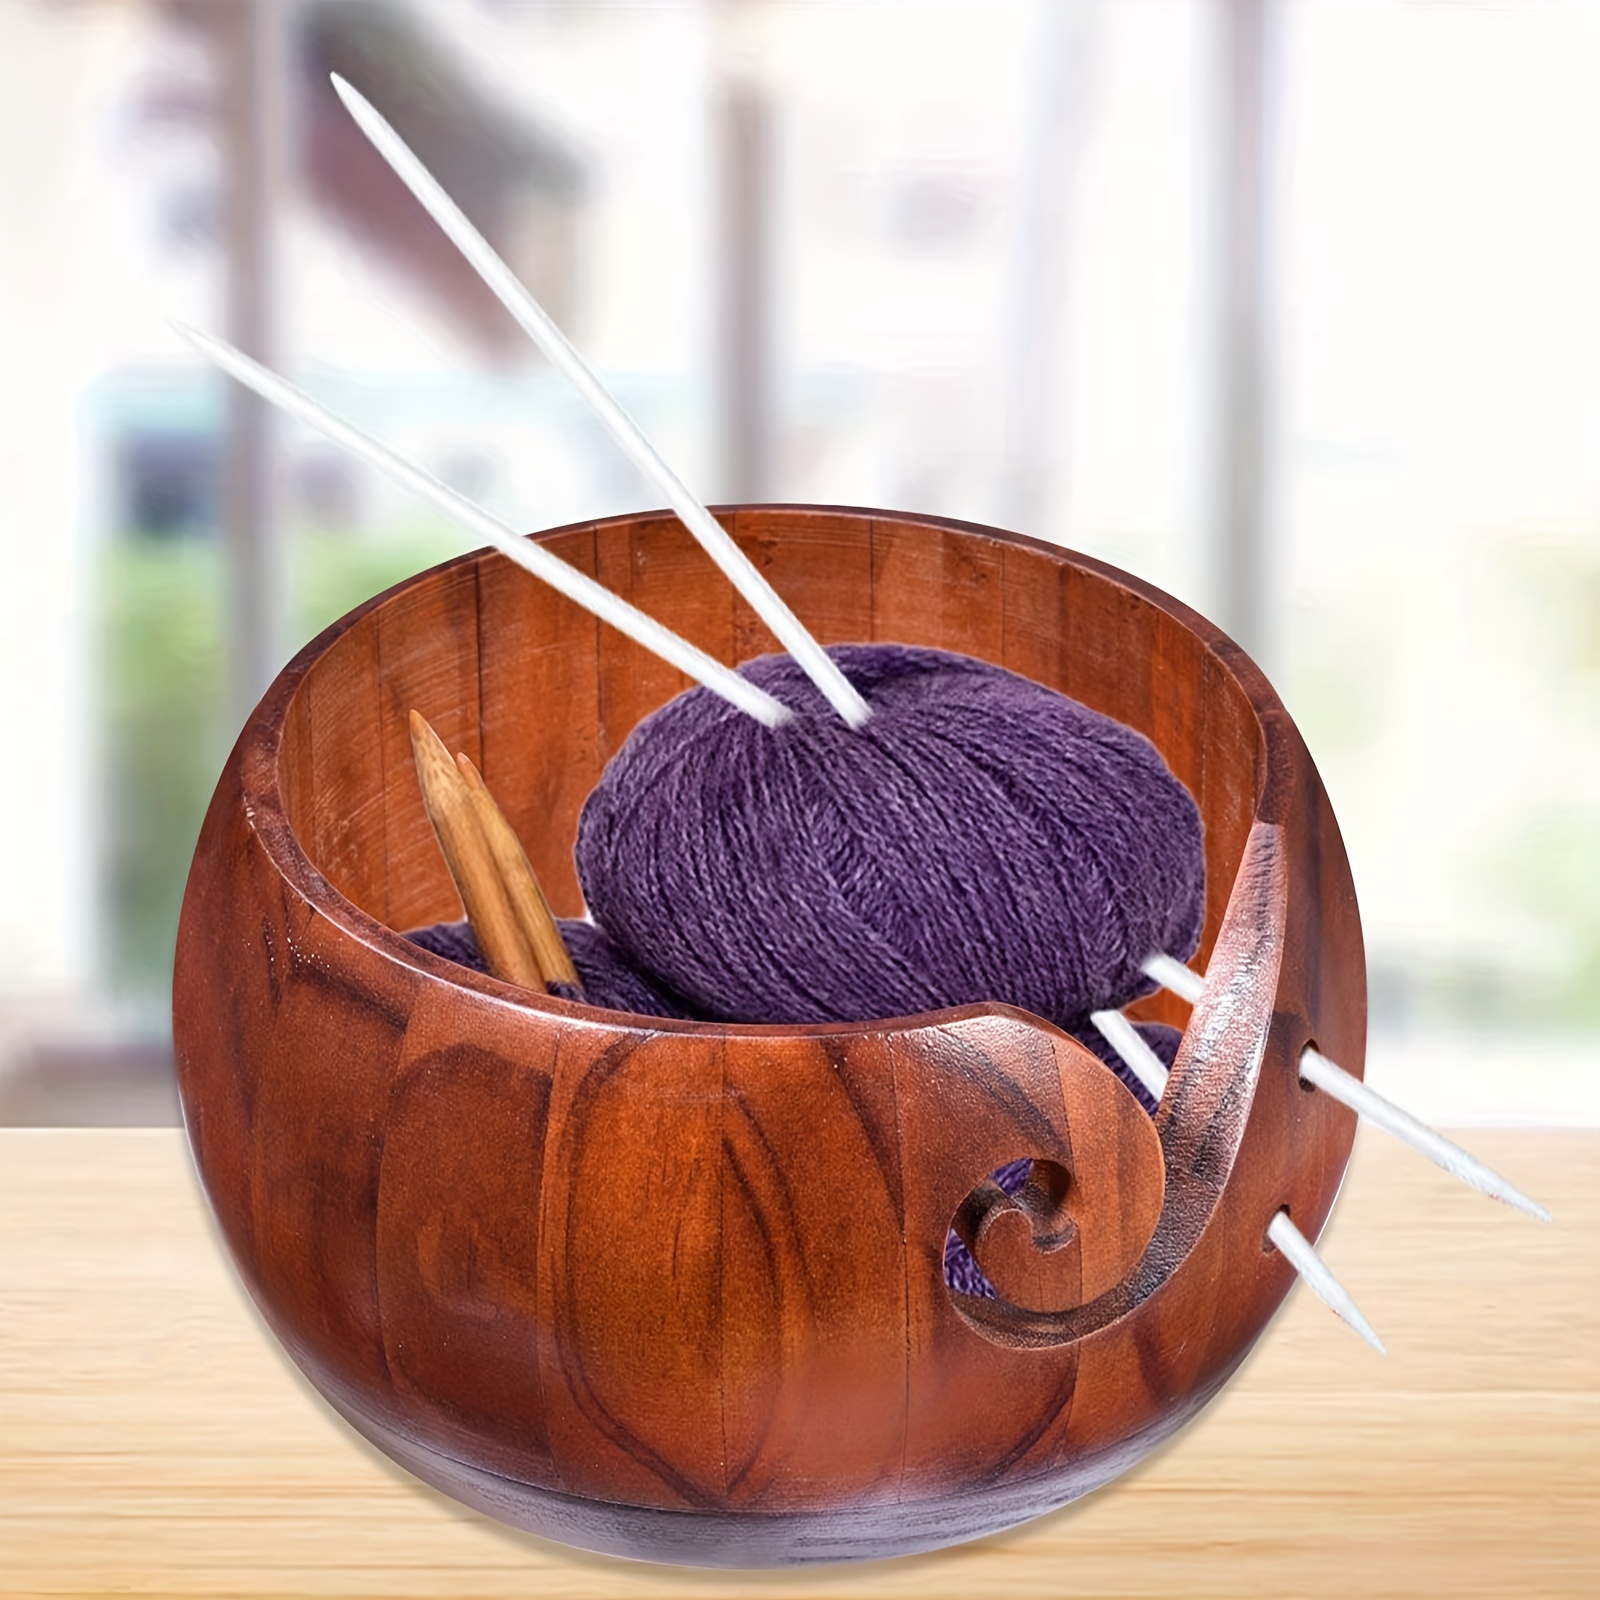 Frcolor Wooden Yarn Bowl Crochet Knitting Yarn Storage Holder Decorative Container, Size: 16x15cm